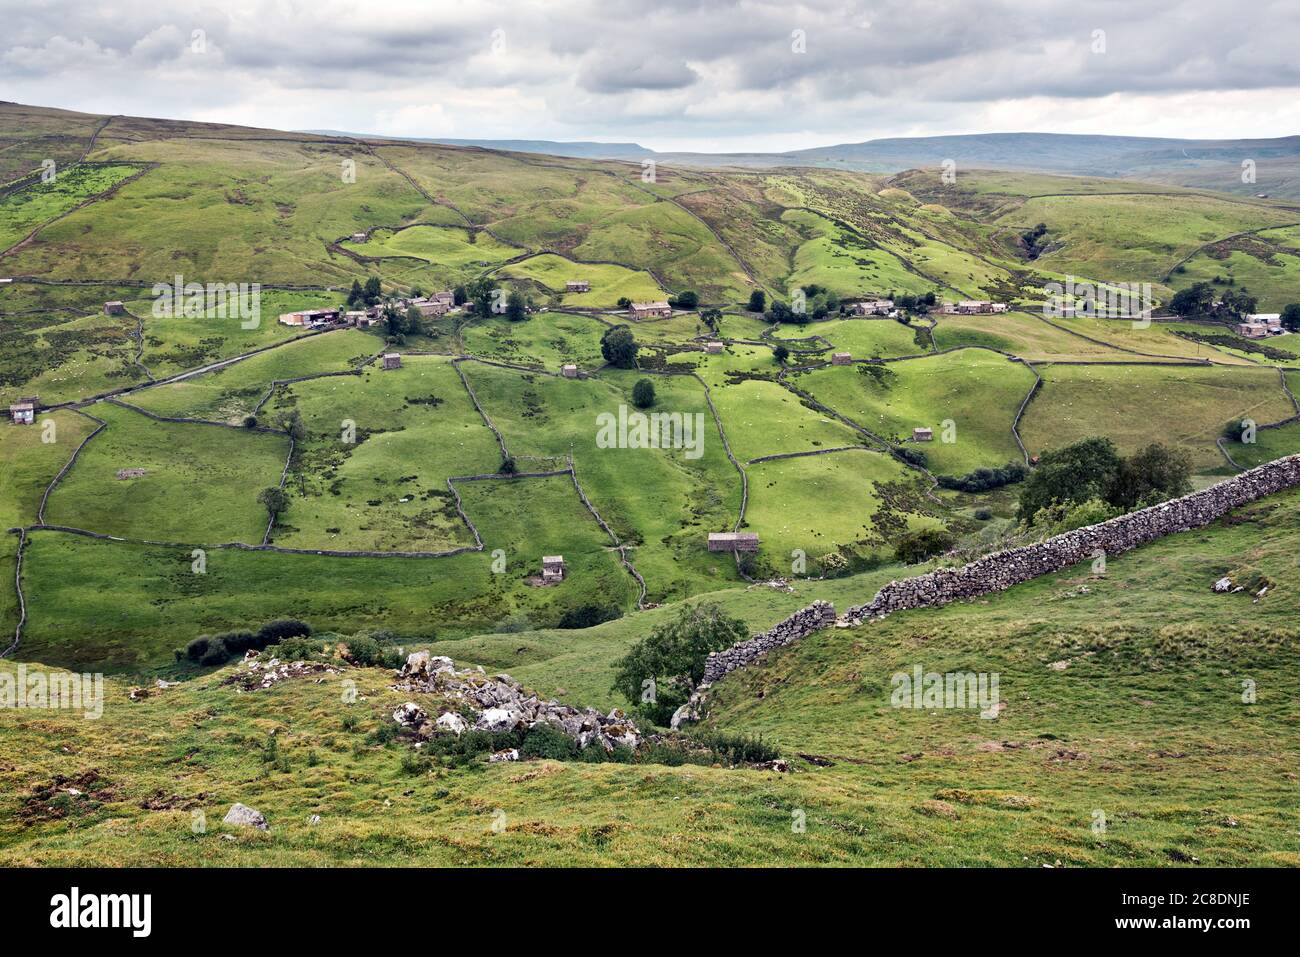 The hamlet of Angram, upper Swaledale, in the Yorkshire Dales National Park, UK. Stock Photo